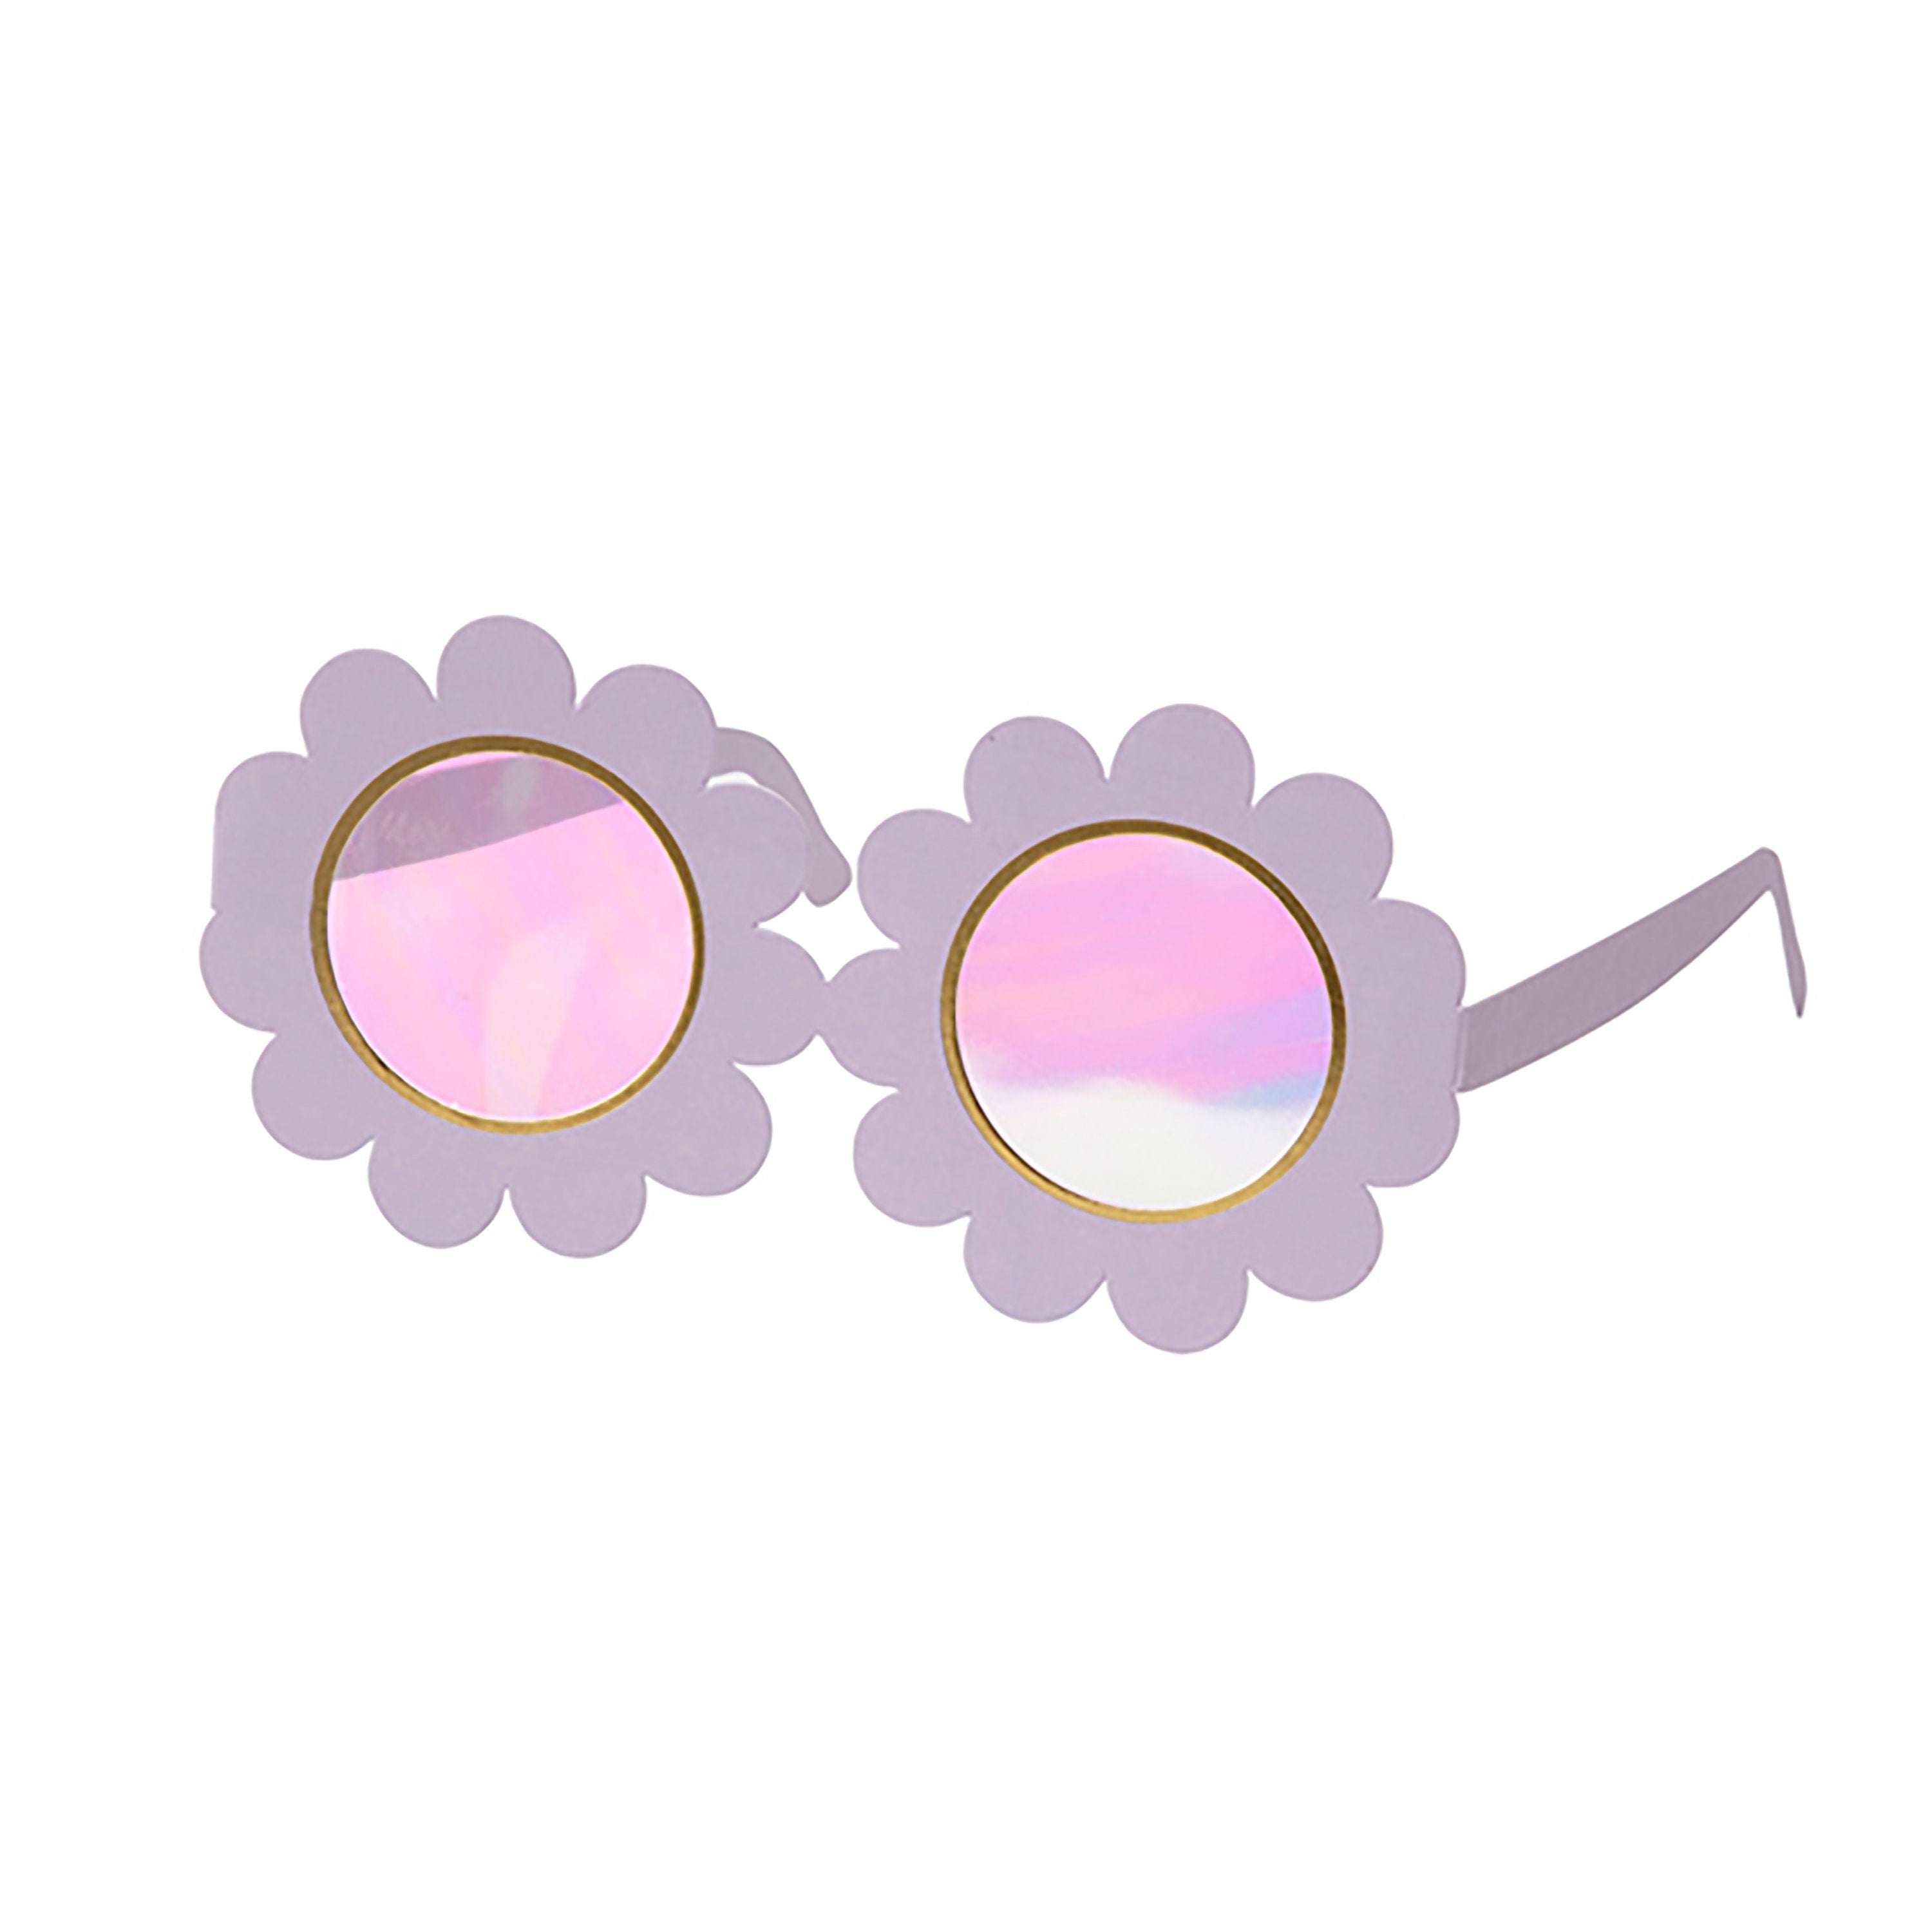 Party Glasses - Daisy Sunglasses | Flower Glasses - Party Sunglasses - Daisy Glasses - 60s Themed Party - Retro Party Theme - 70s Party